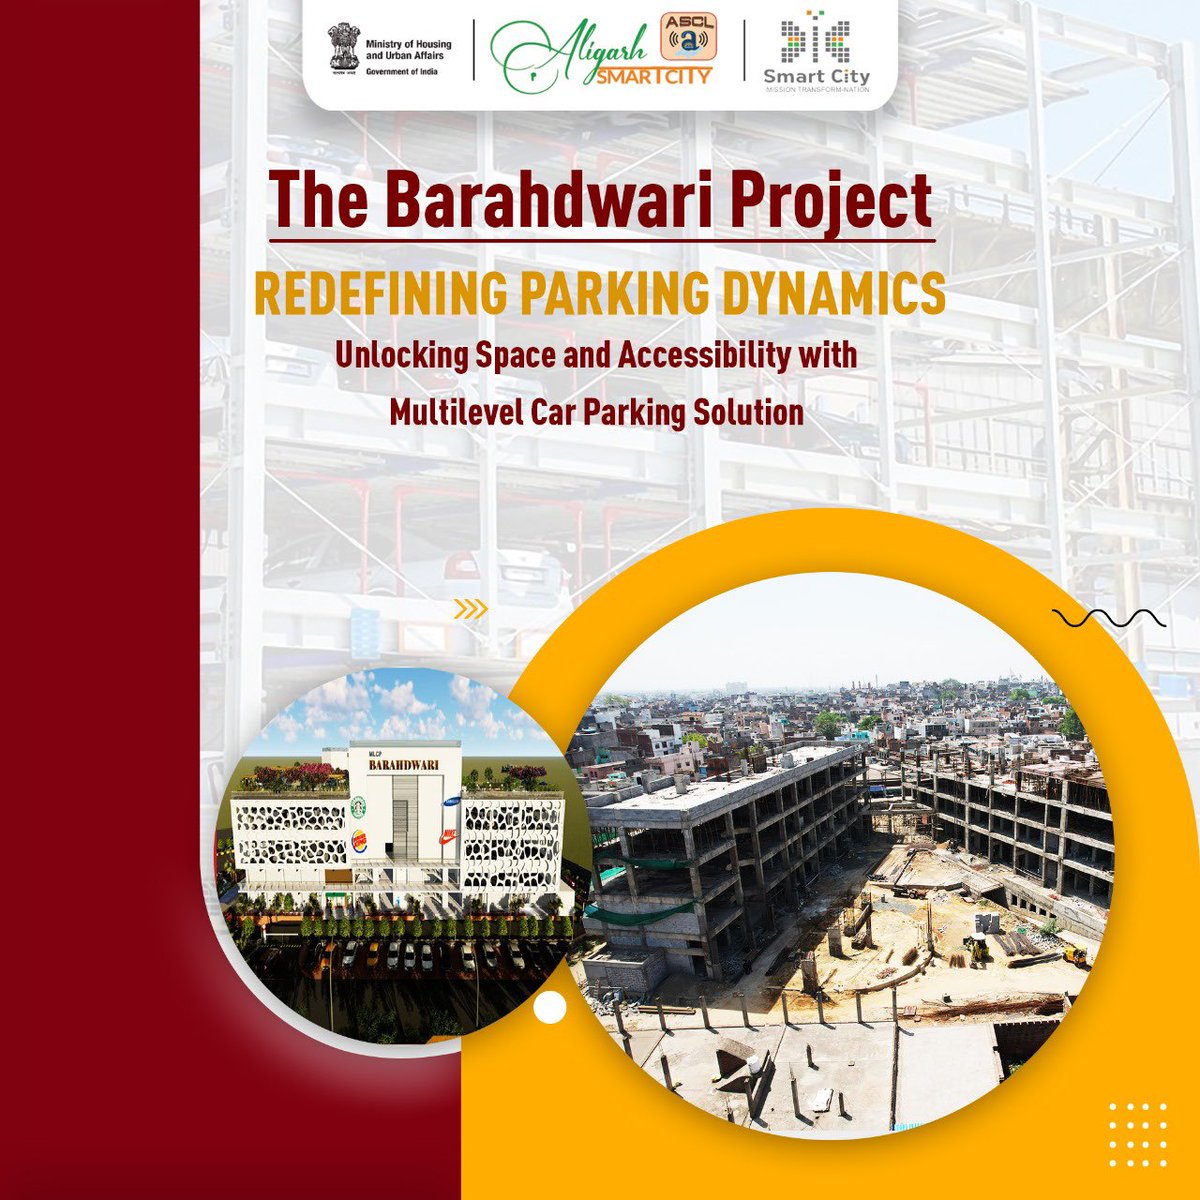 The Barhadwari Project: Redefining parking dynamics with our innovative multilevel car parking solution. Say goodbye to parking woes and hello to unlocked space and accessibility. #Barahdwariproject #ParkingInnovation #MultilevelParking #Accessibility #aligarh #aligarhsmartcity